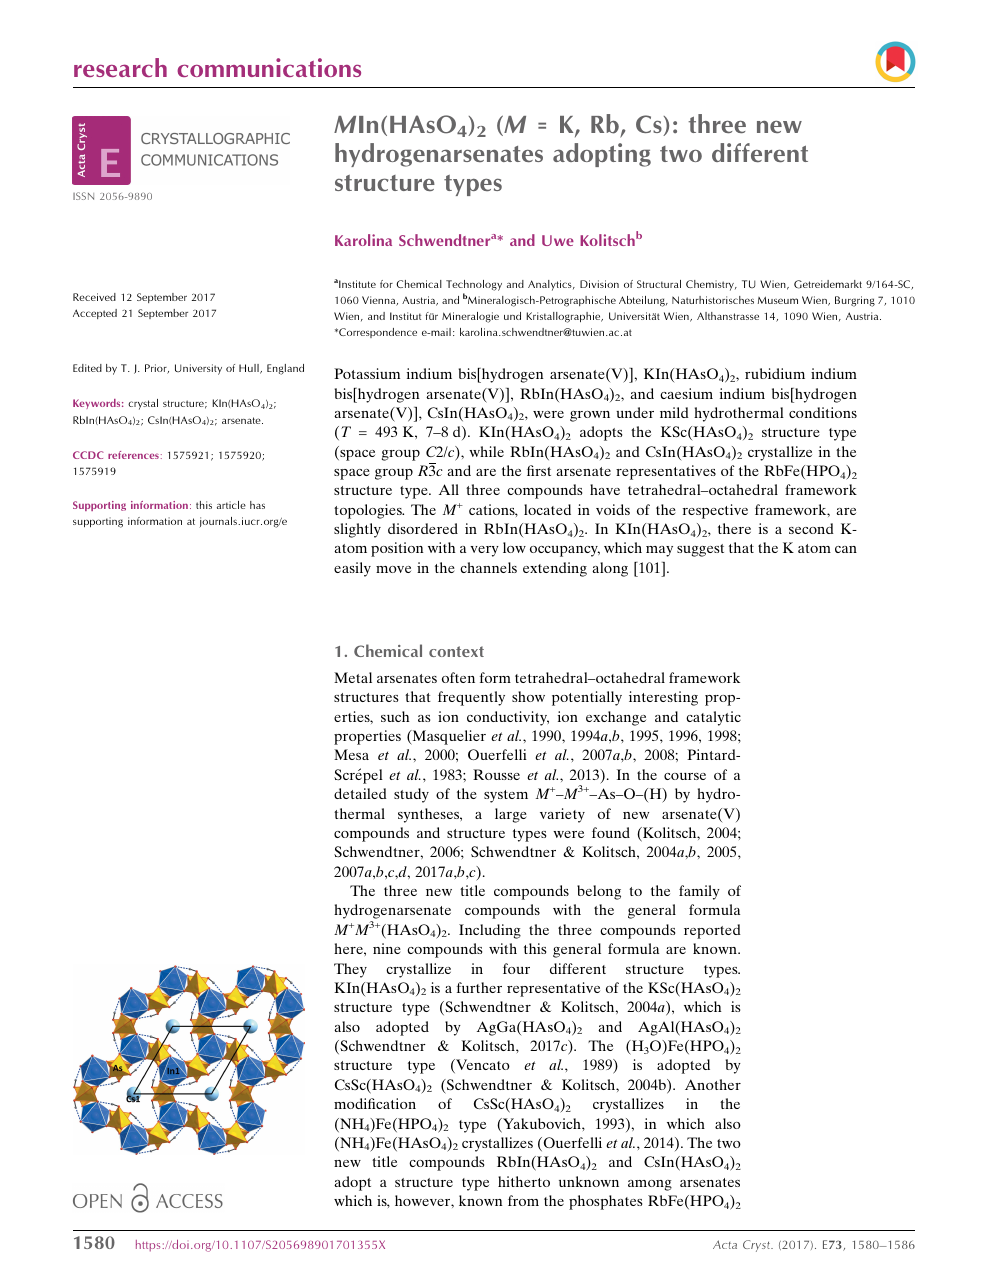 Min Haso4 2 M K Rb Cs Three New Hydrogenarsenates Adopting Two Different Structure Types Topic Of Research Paper In Chemical Sciences Download Scholarly Article Pdf And Read For Free On Cyberleninka